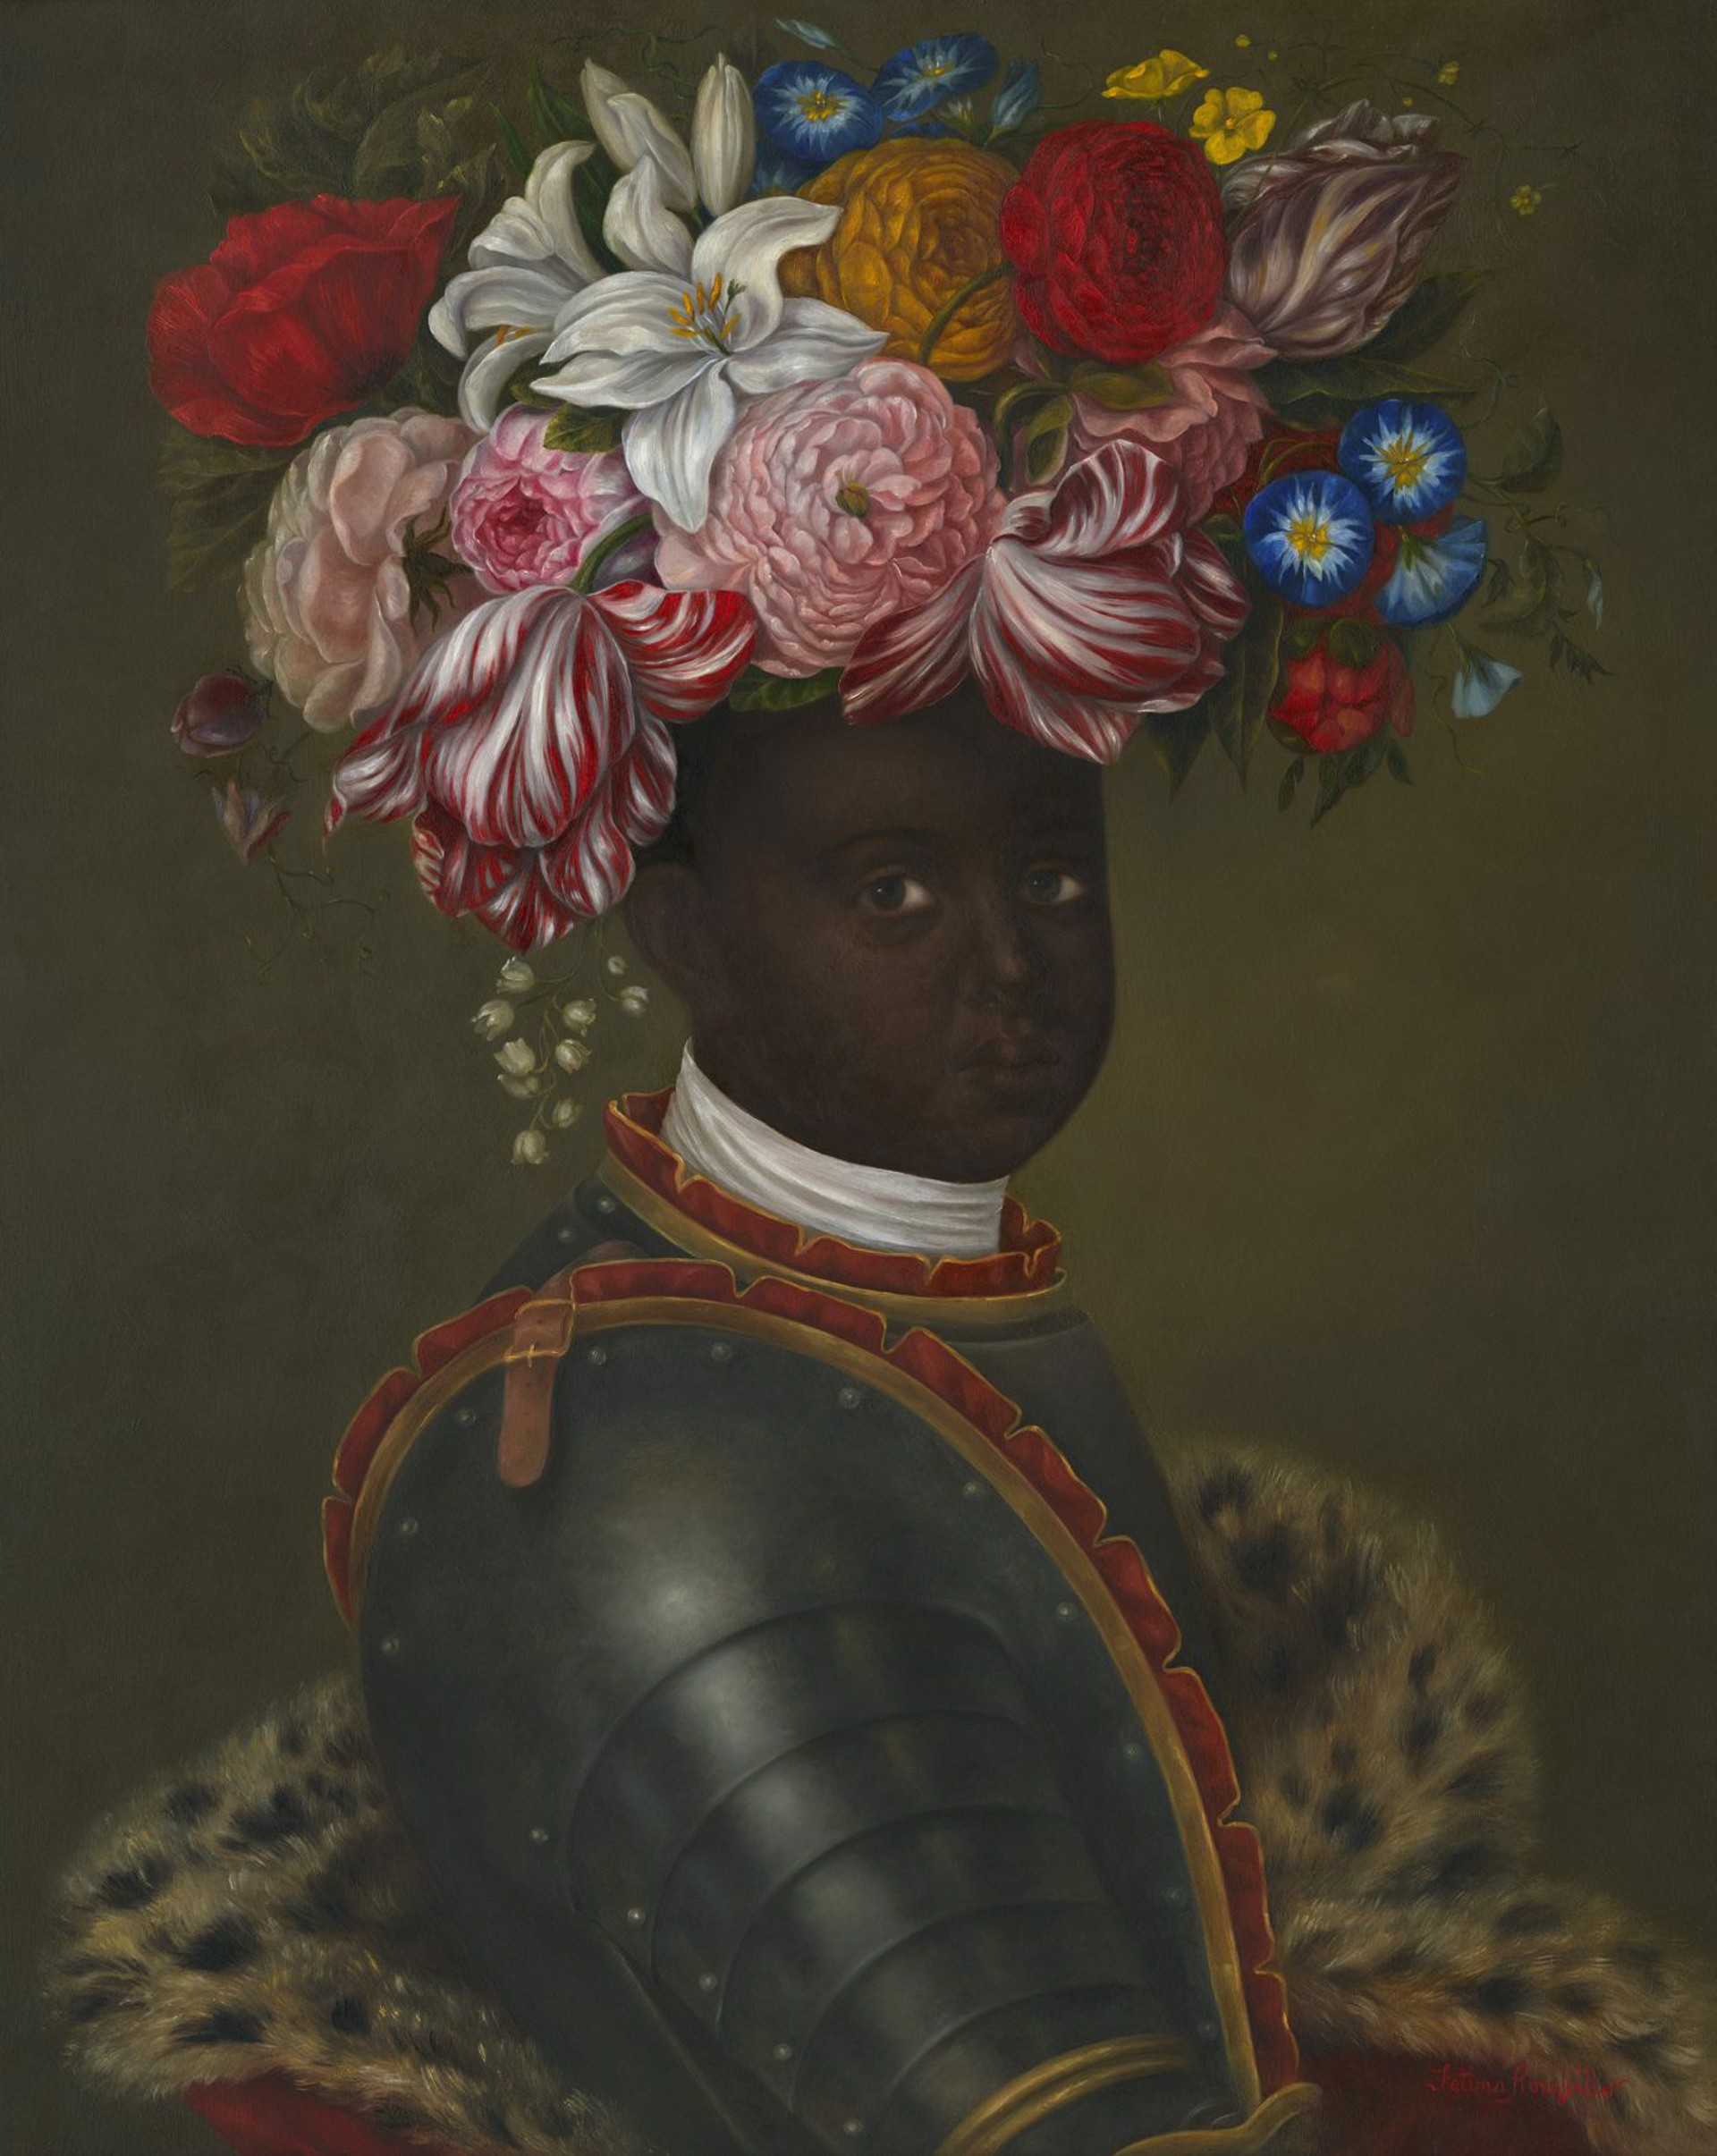 Armored Saint with Crown of Flowers by Fatima Ronquillo